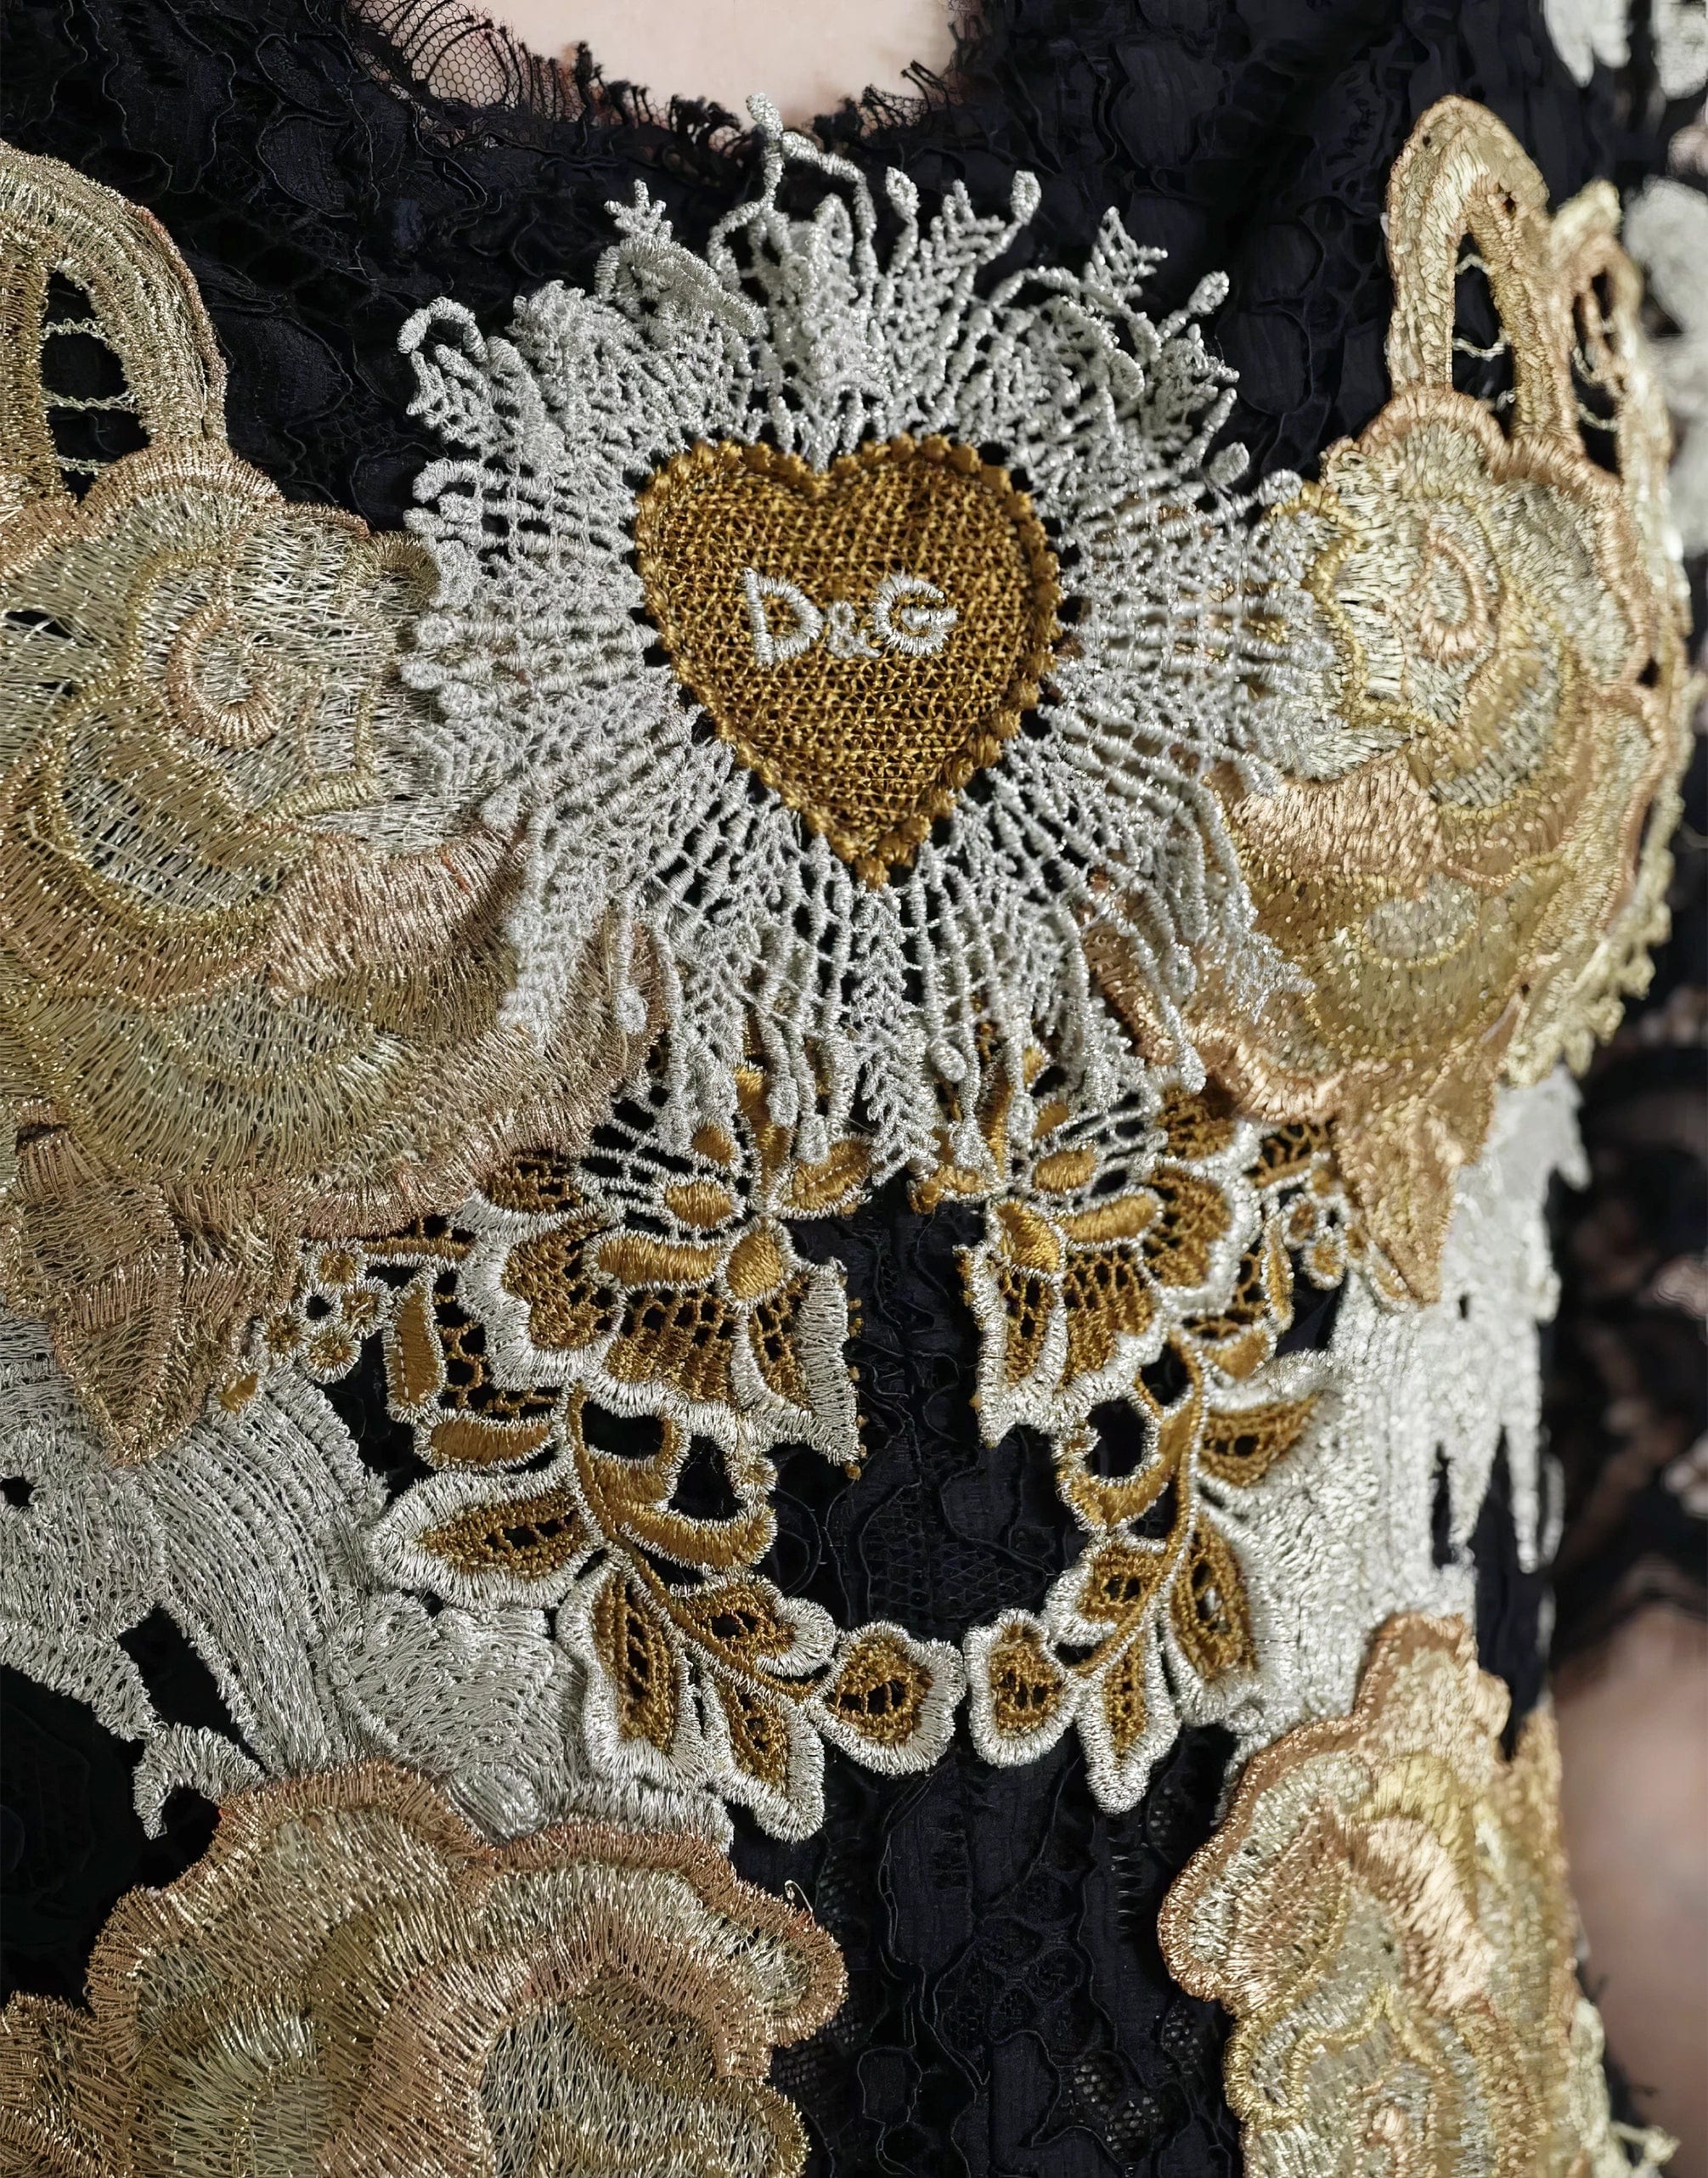 Dolce & Gabbana Lace Dress With Gold Sacred Heart Detailings